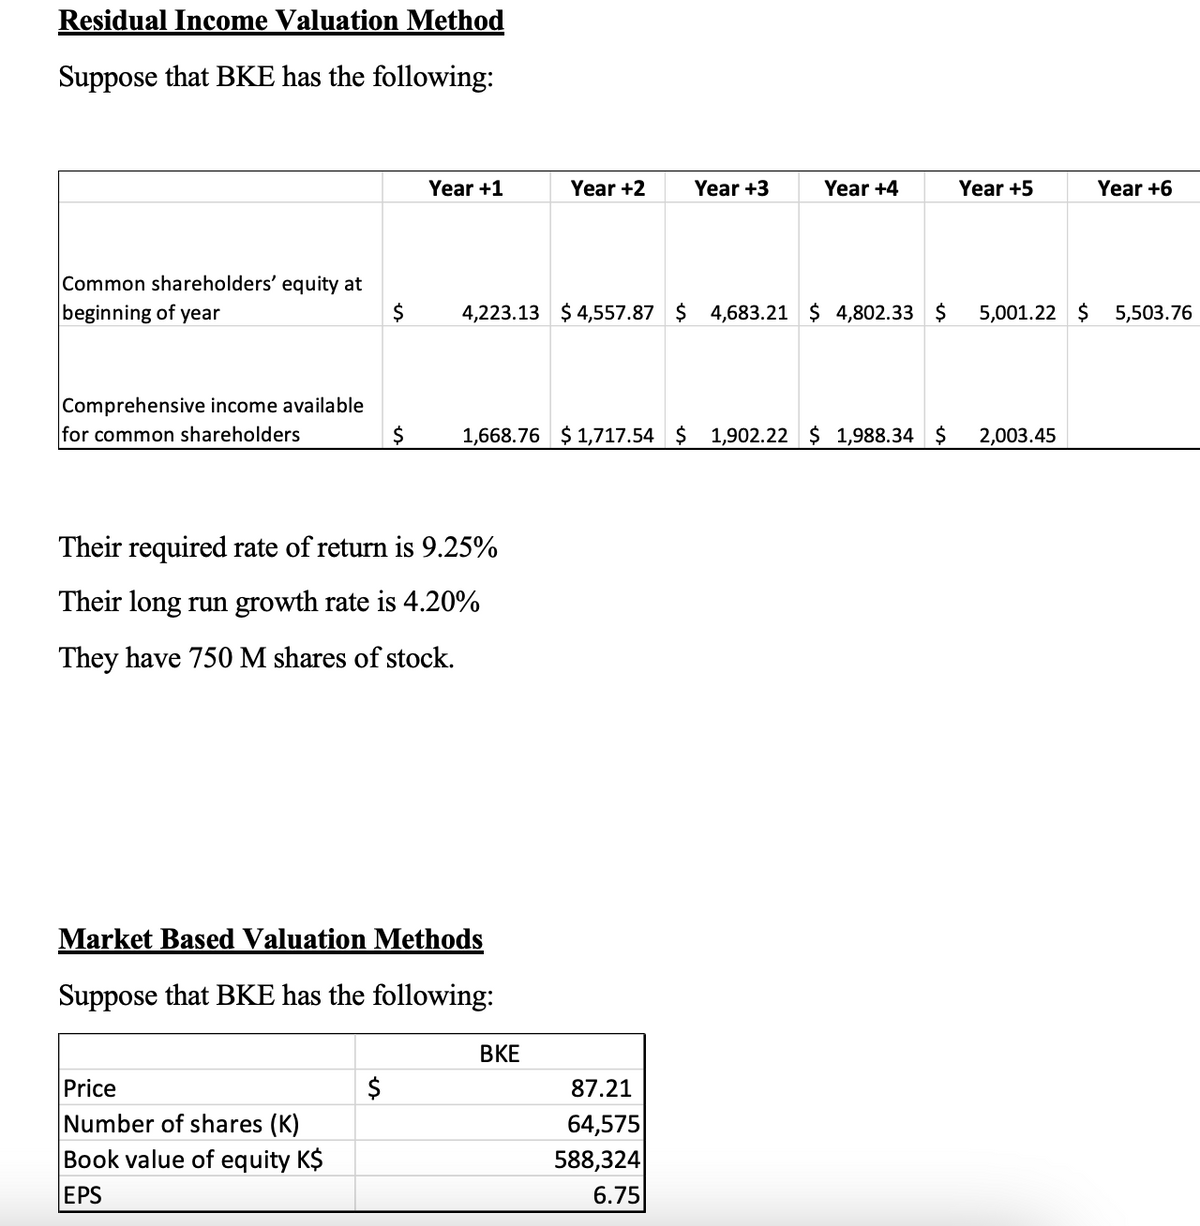 Residual Income Valuation Method
Suppose that BKE has the following:
Year +1
Year +2
Year +3
Year +4
Year +5
Year +6
Common shareholders' equity at
beginning of year
$
4,223.13 $4,557.87 $ 4,683.21 $ 4,802.33 $
5,001.22 $ 5,503.76
Comprehensive income available
for common shareholders
1,668.76 $1,717.54 $ 1,902.22 $ 1,988.34 $
2,003.45
Their required rate of return is 9.25%
Their long run growth rate is 4.20%
They have 750 M shares of stock.
Market Based Valuation Methods
Suppose that BKE has the following:
BKE
Price
$
87.21
Number of shares (K)
64,575
Book value of equity K$
588,324
EPS
6.75